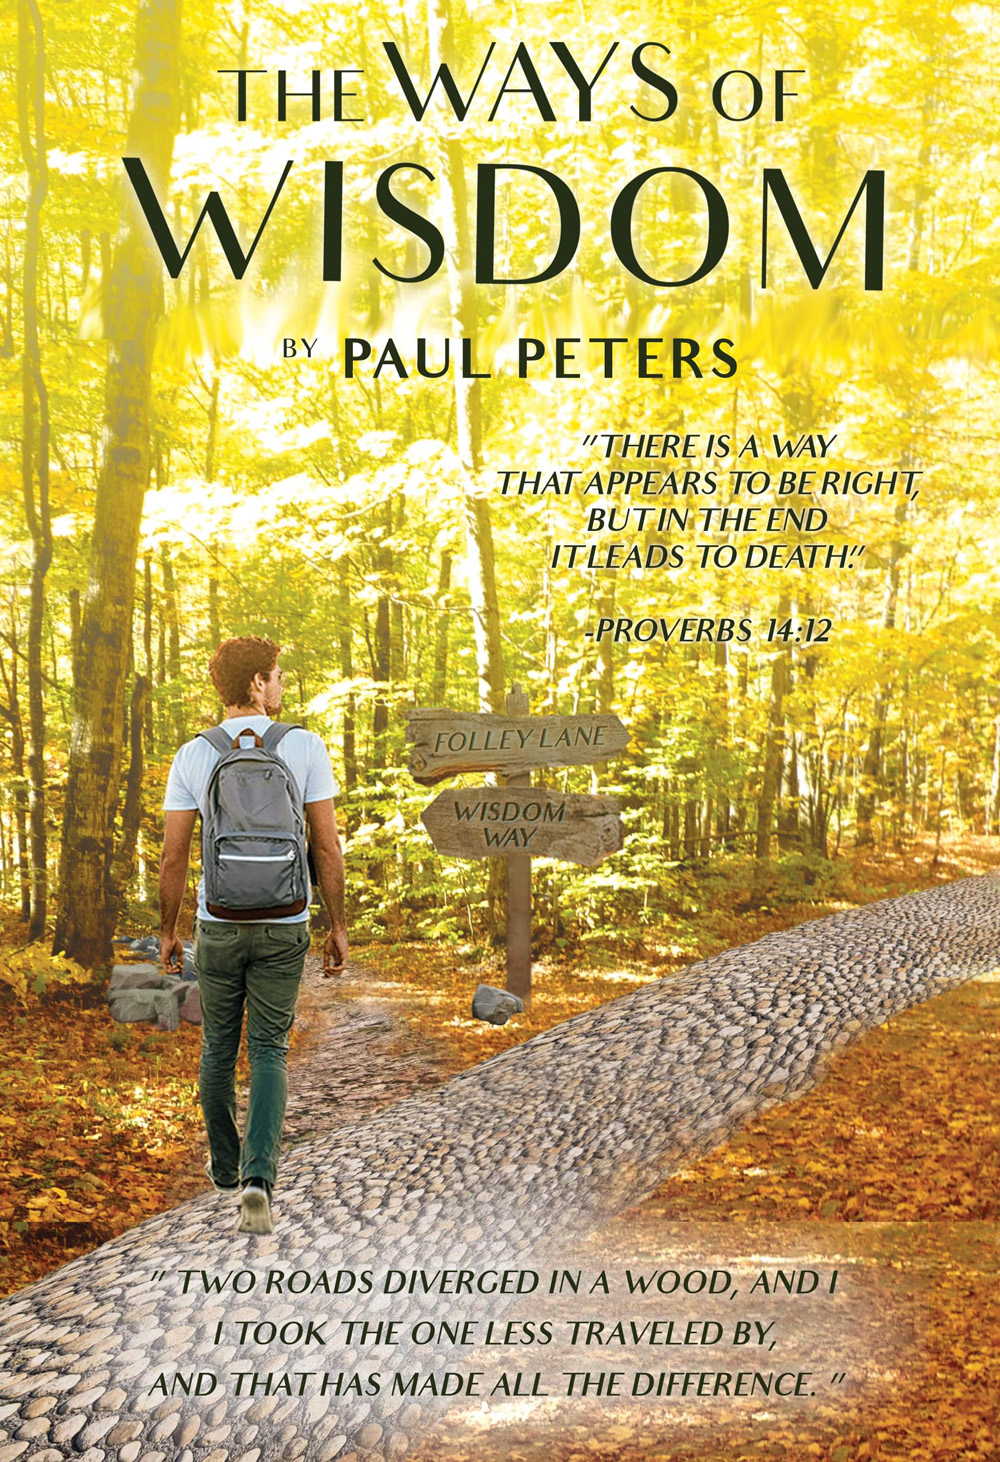 The Ways of Wisdom by Paul Peters